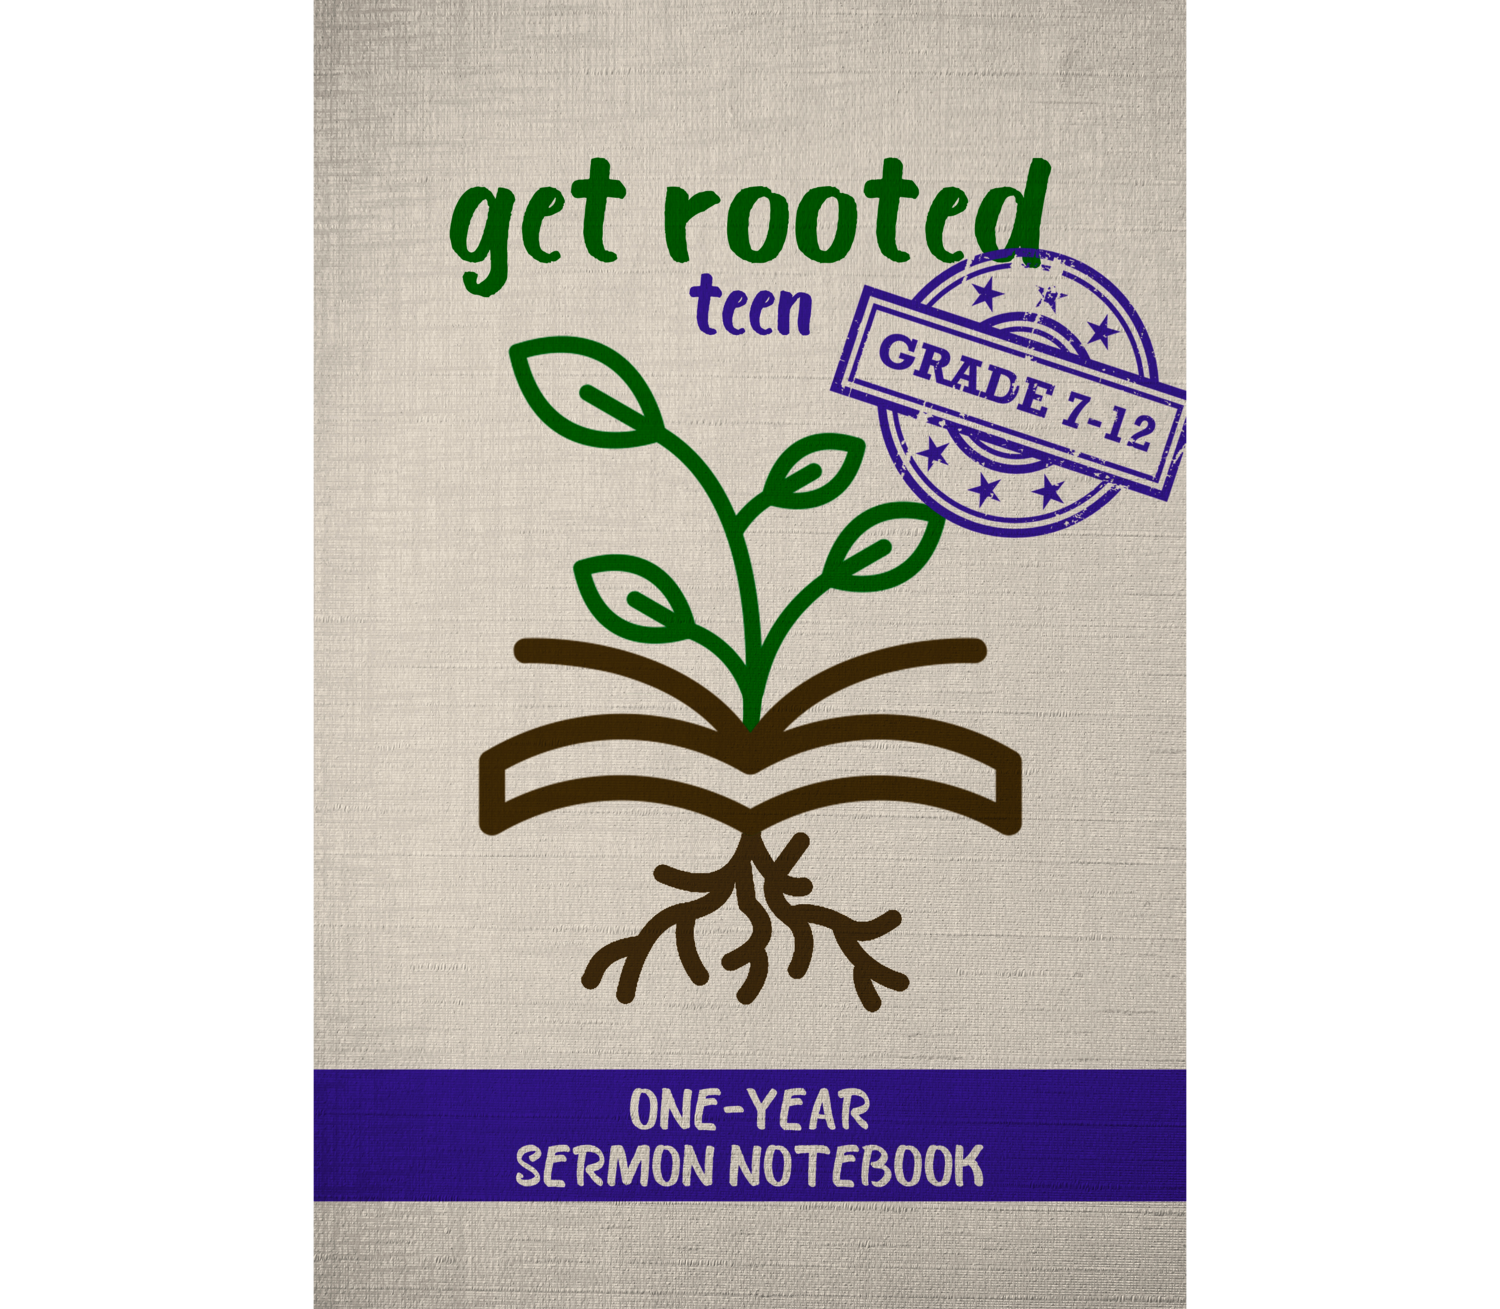 Get Rooted One-Year Sermon Notebook (Grade 7-12)